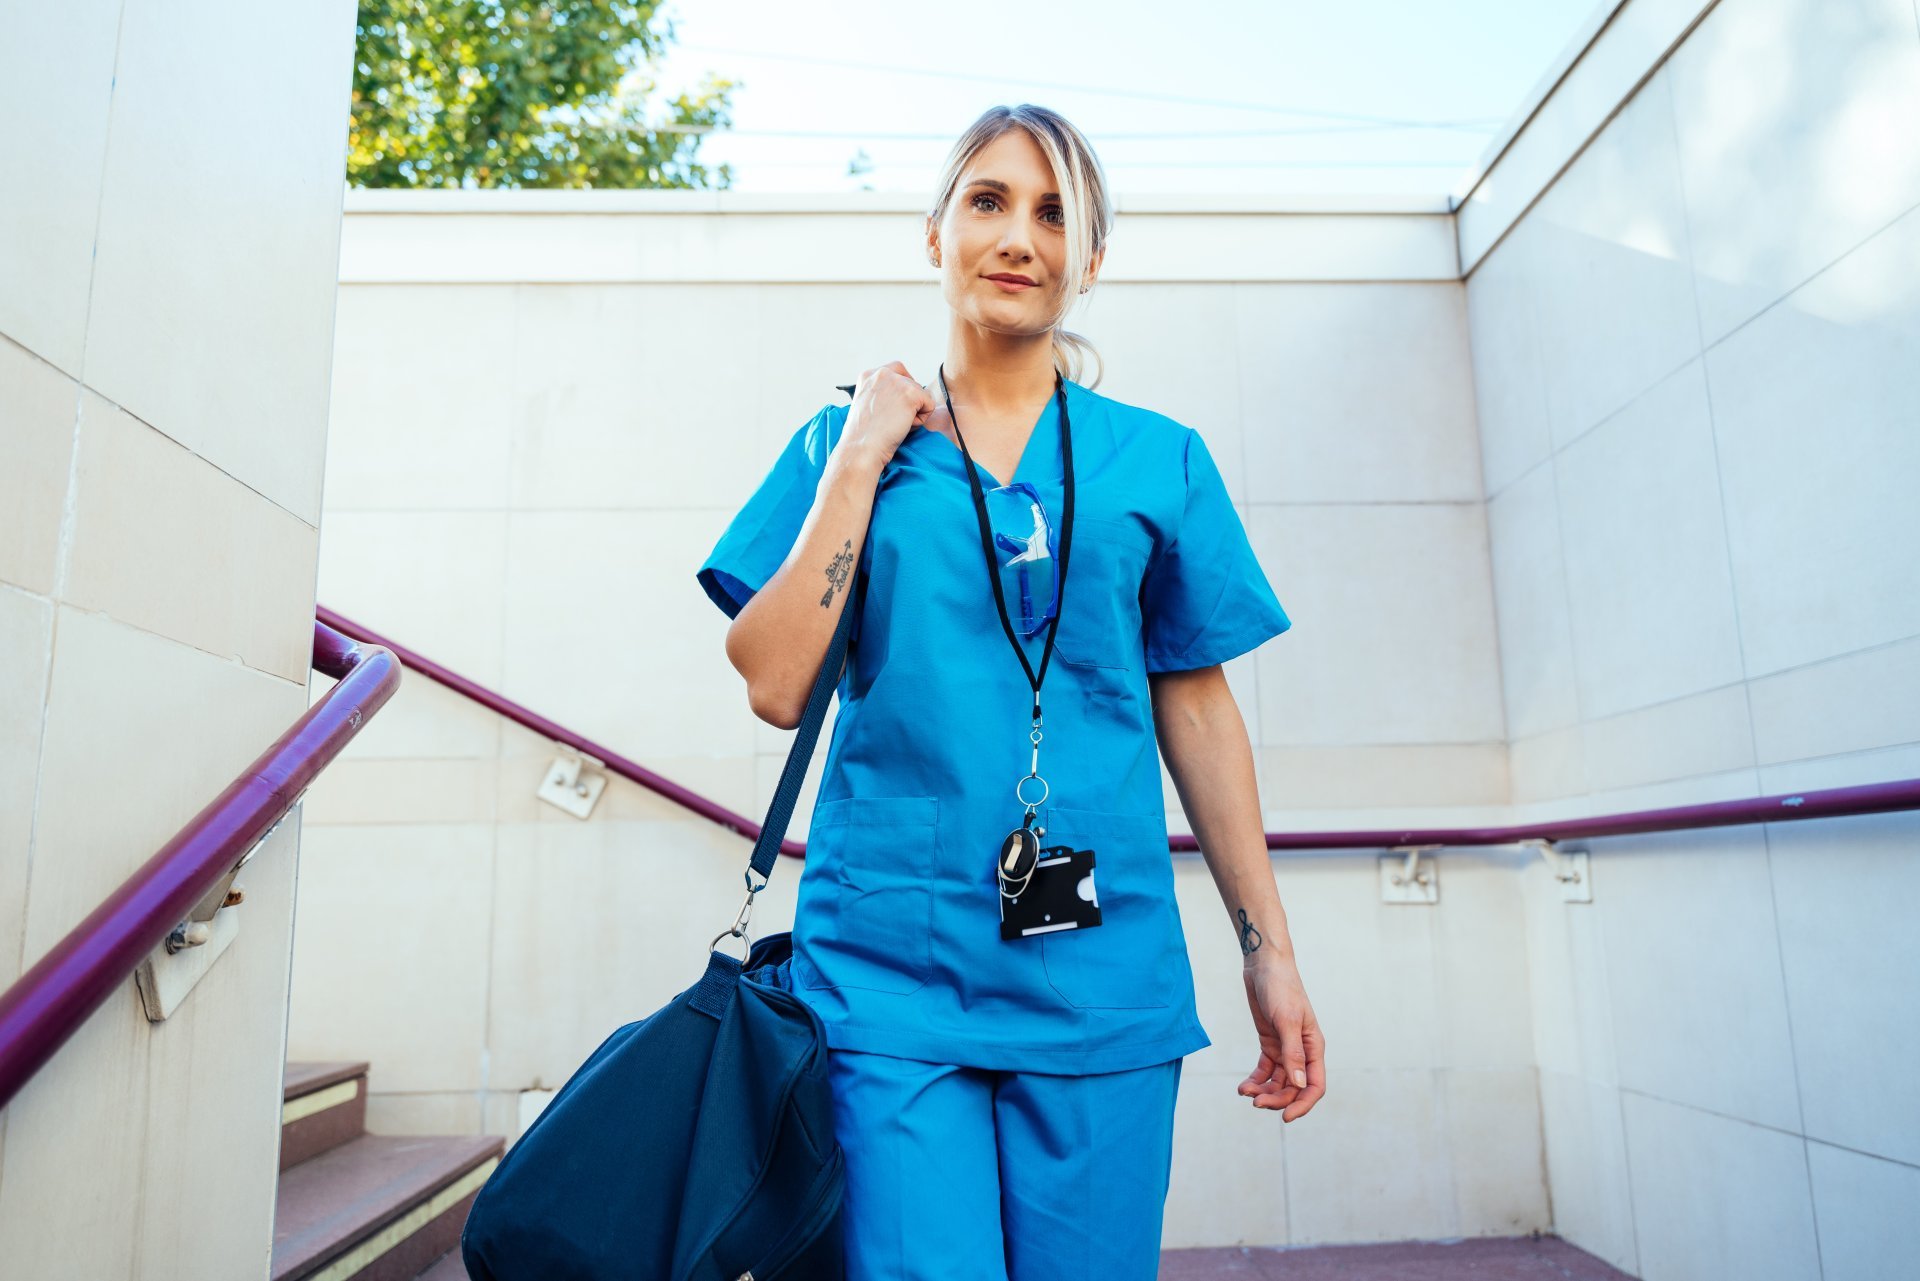 A female nurse in scrubs holds a duffel bag while descending an outdoor staircase.